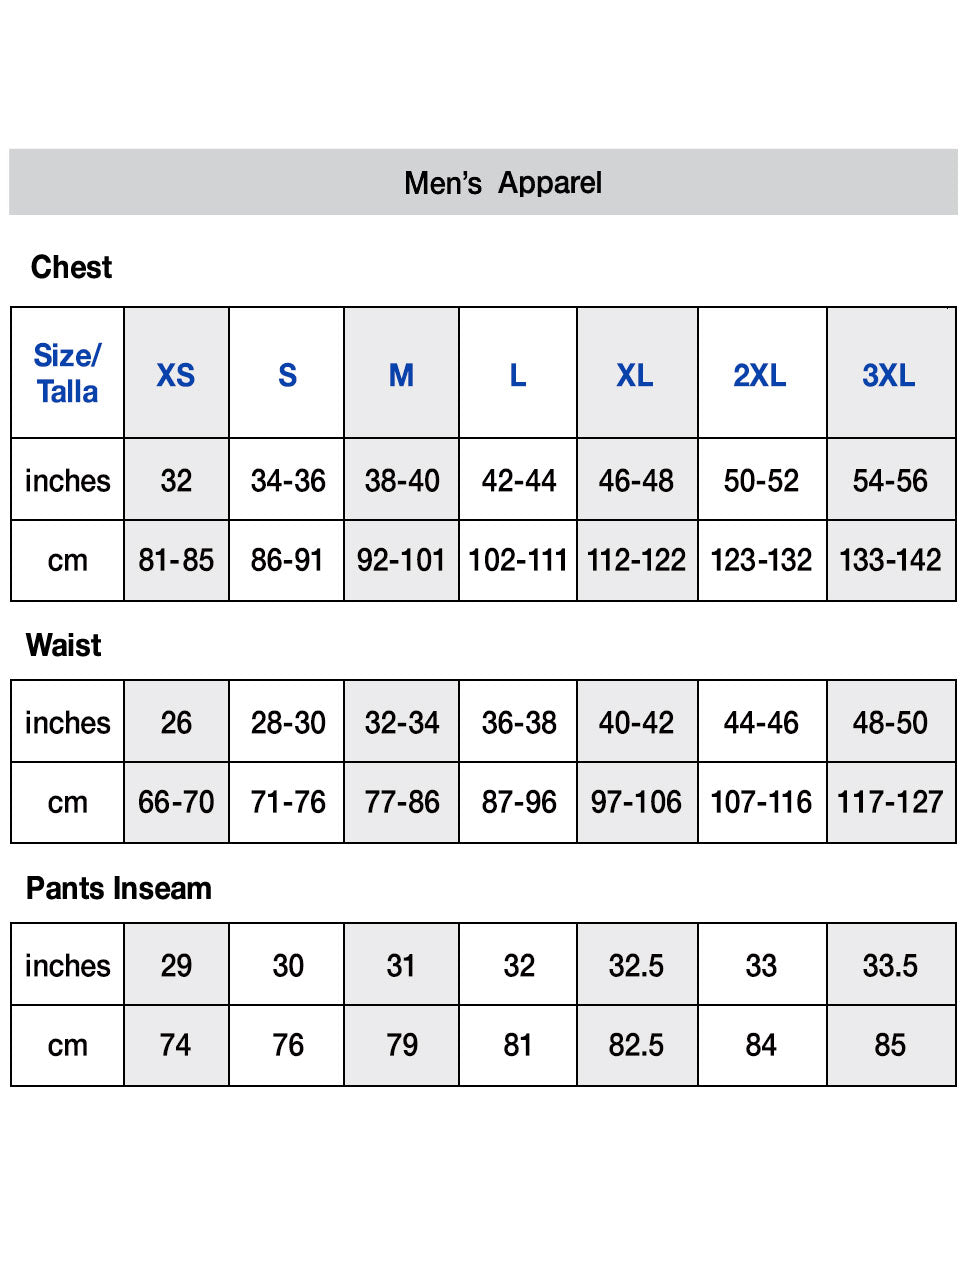 Men's Authentic Cotton Jersey Shorts With Pockets